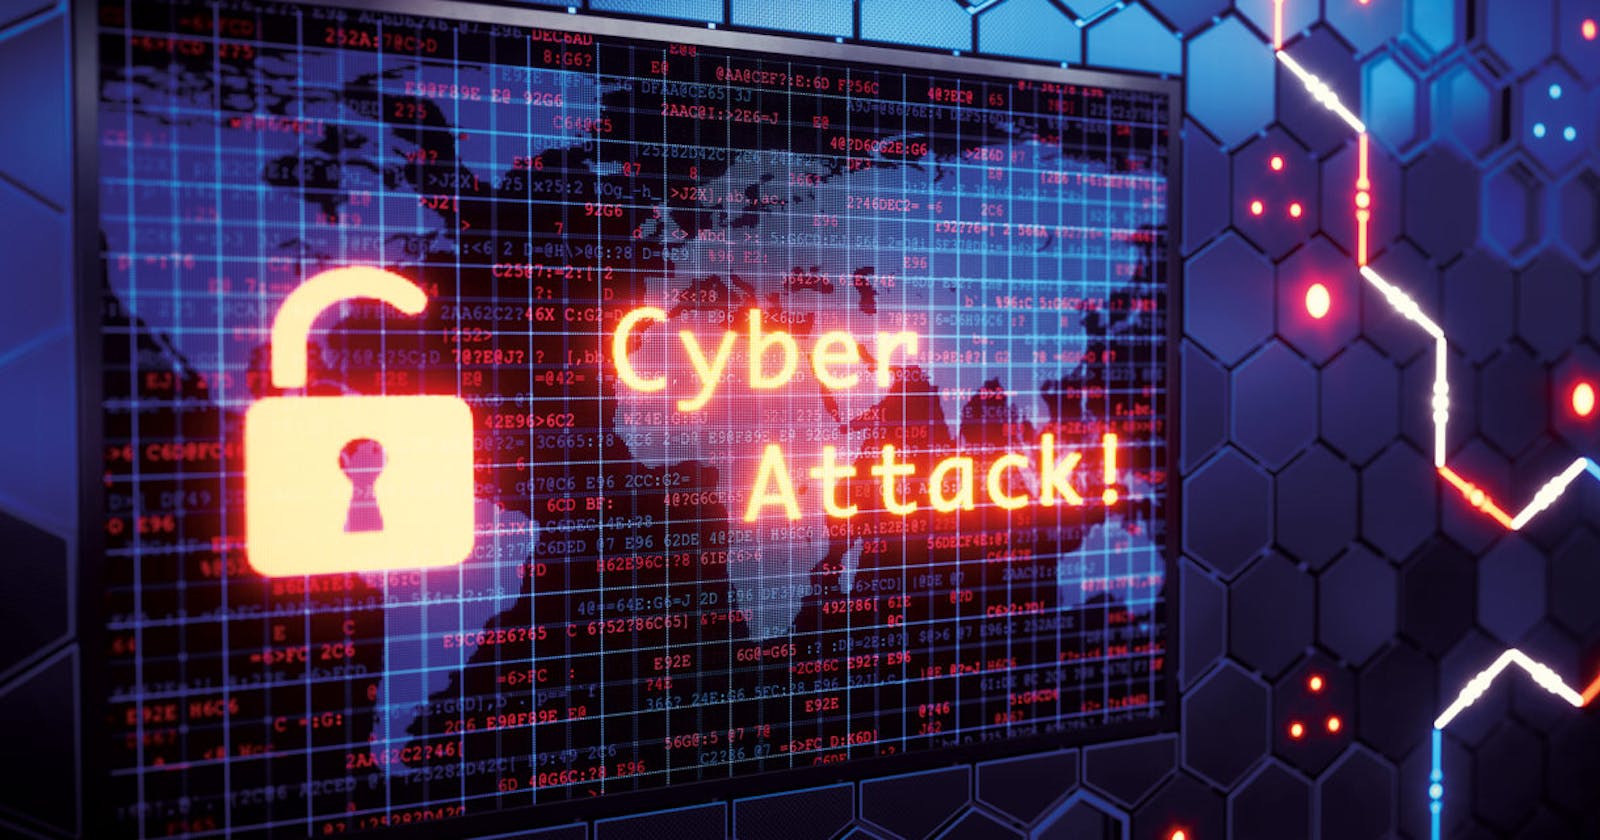 Types of Cyber Attacks and ways to prevent them